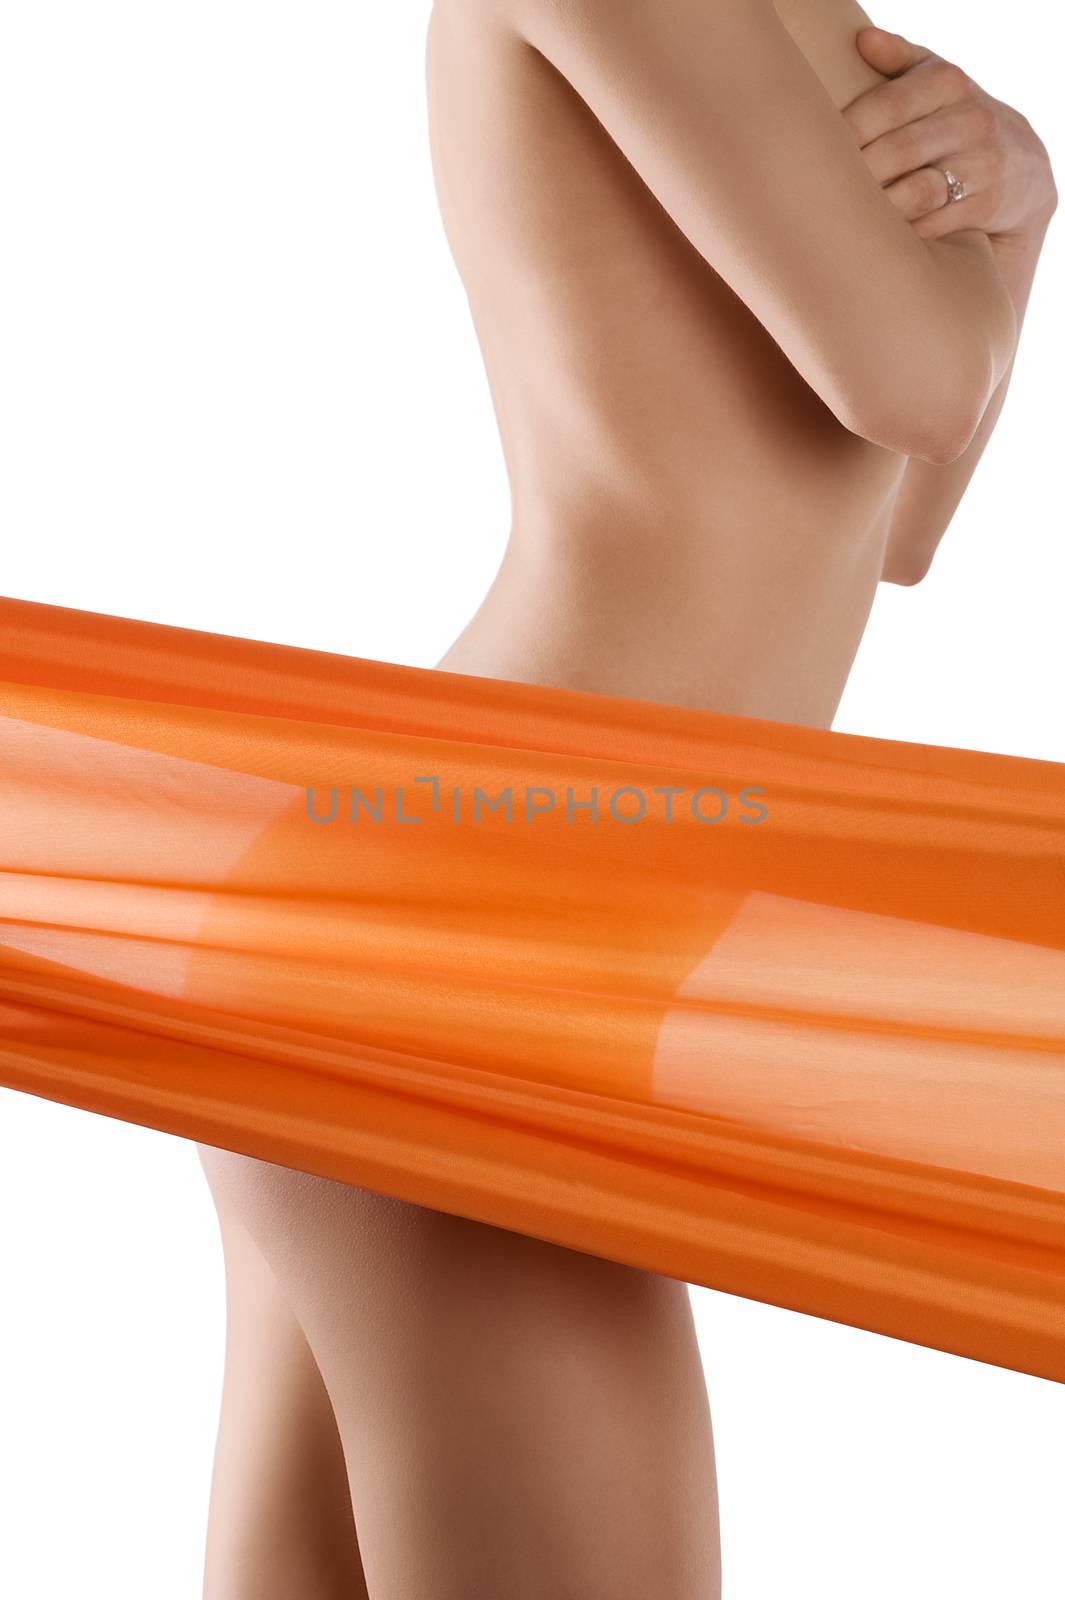 close up on a naked woman body behind a transparent colored material beauty wellness concept